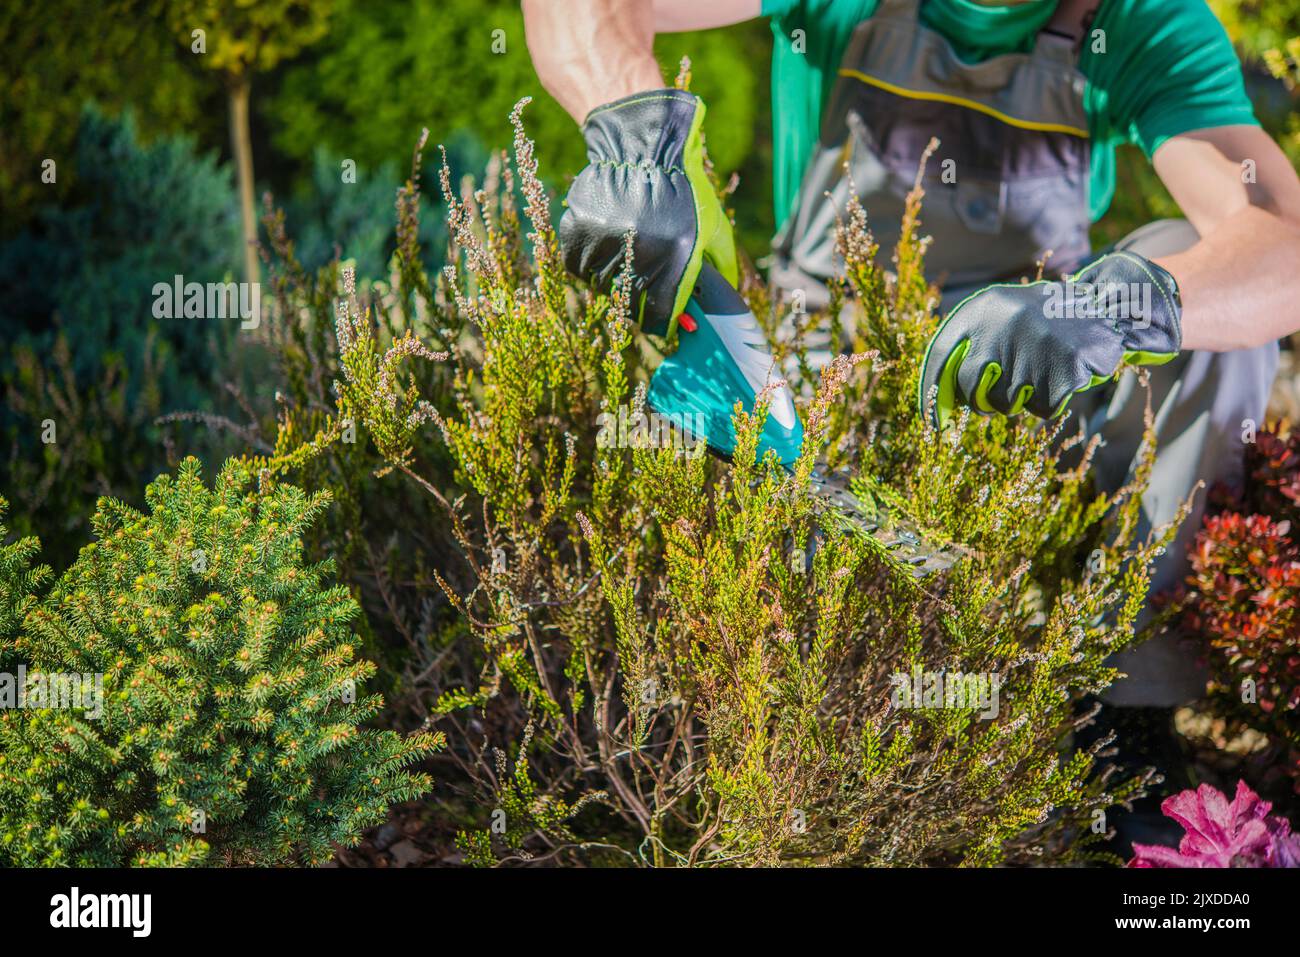 Closeup of Shrub Being Cut by Caucasian Landscaper Using Hand Held Power Trimmer Tool. Garden Care and Maintenance Work. Professional Gardening Equipm Stock Photo